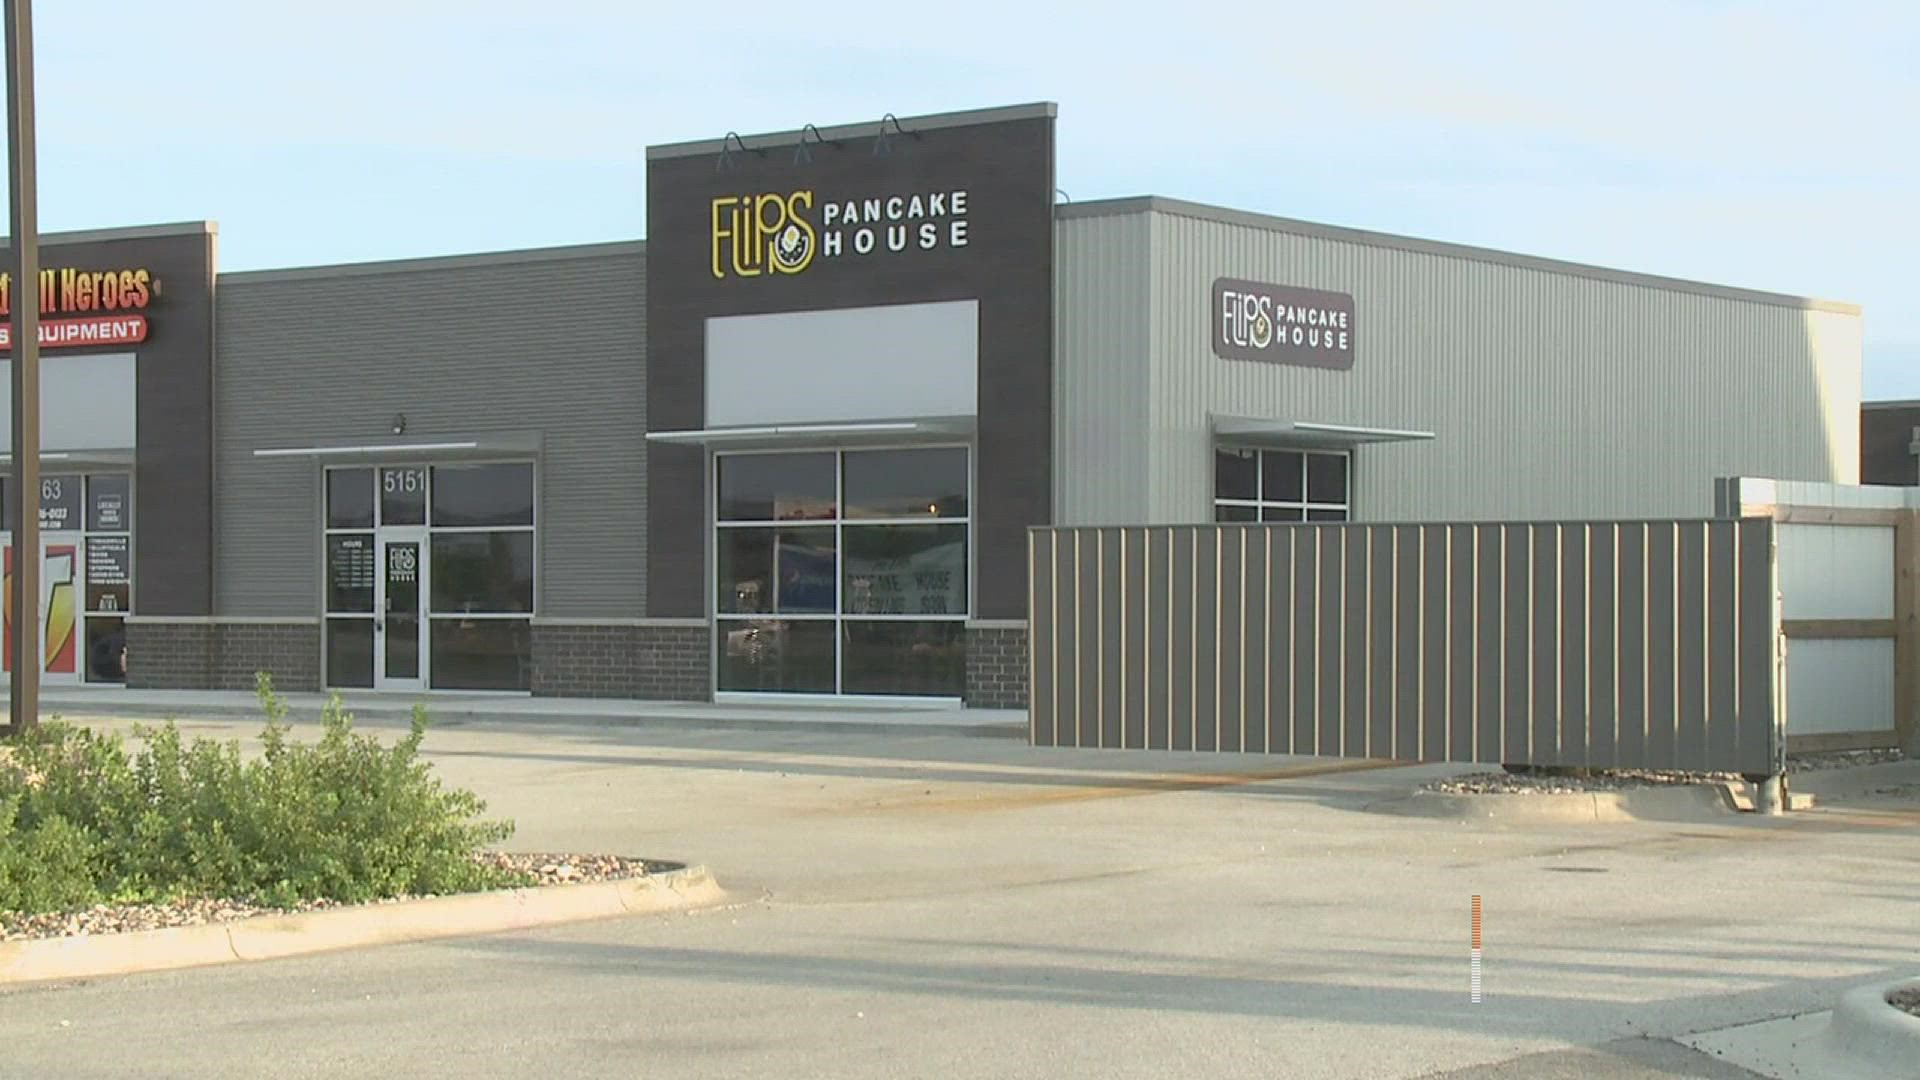 Flip's Pancake House in Moline is expanding to Bettendorf near the TBK Bank Sports Complex